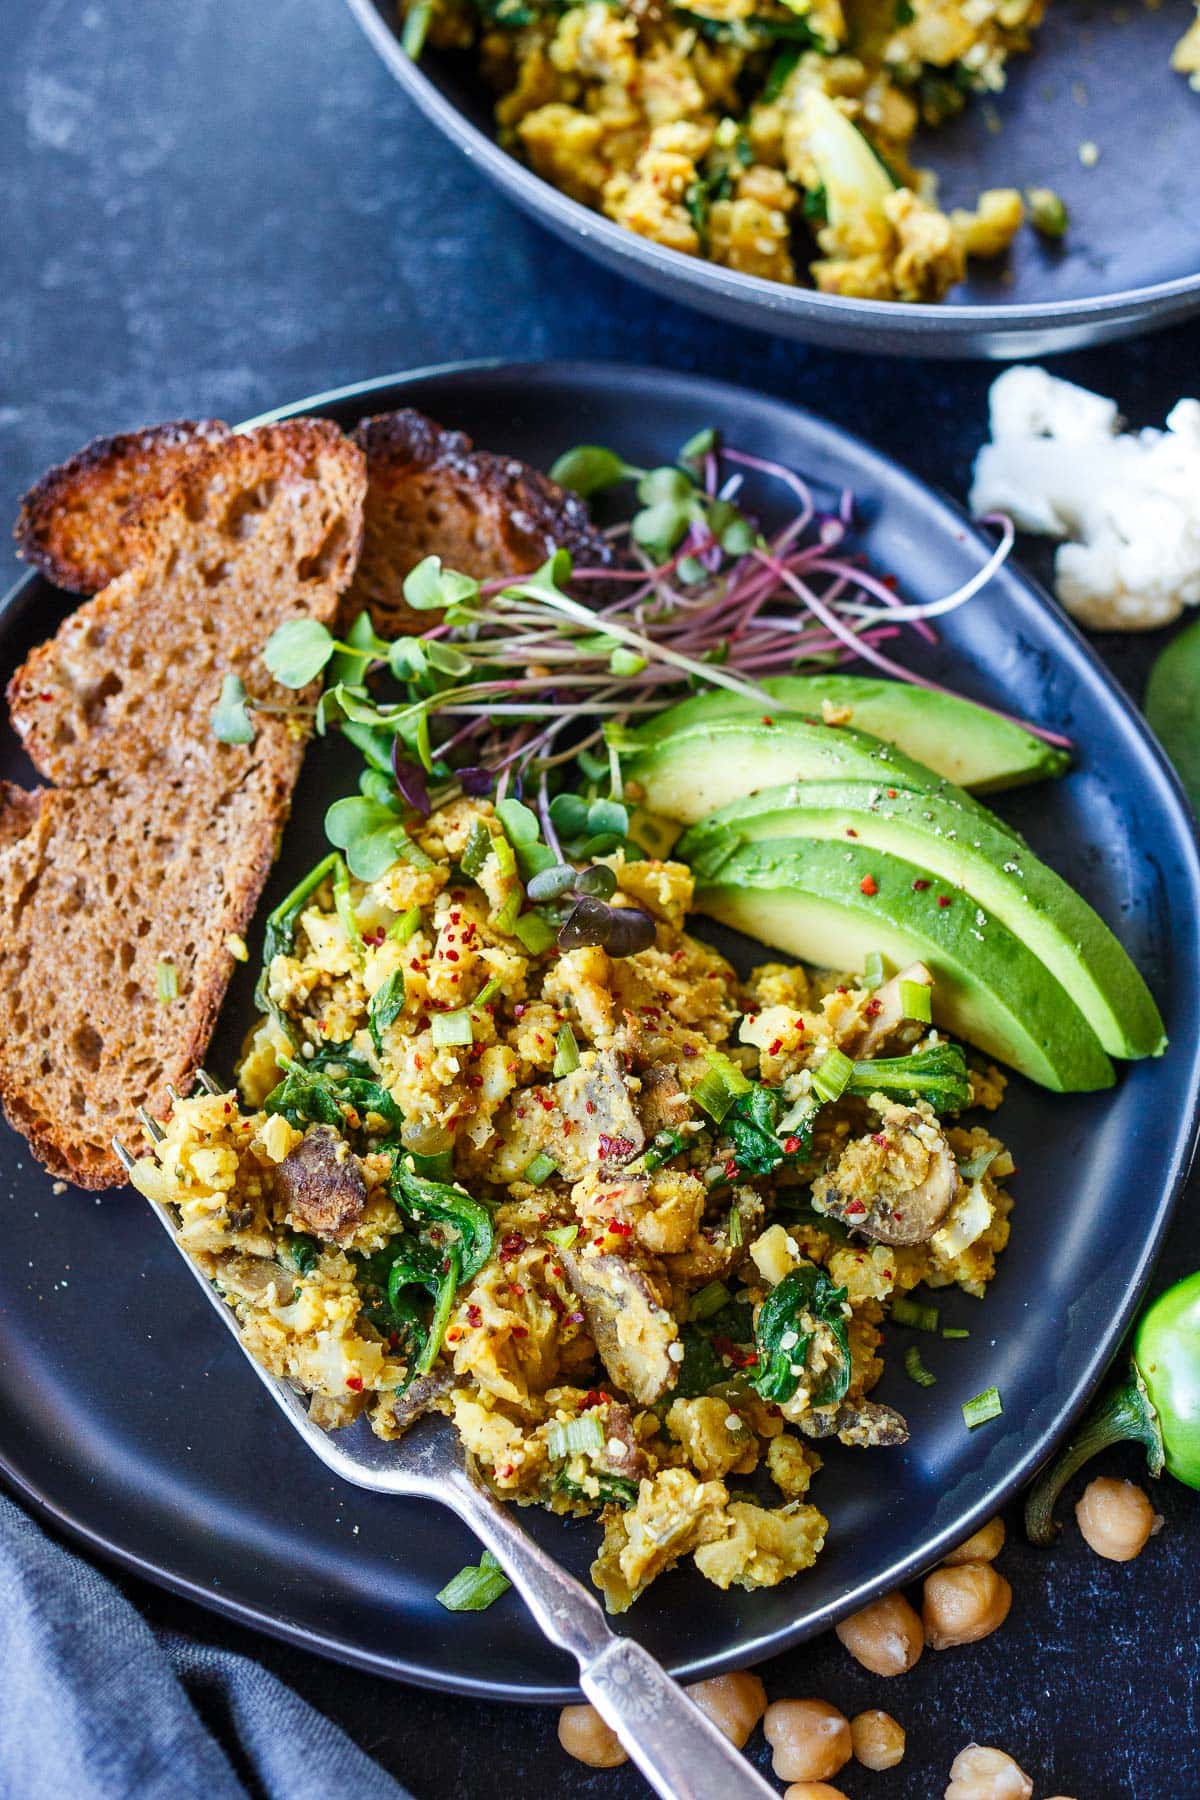 This Chickpea Scramble recipe (vegan scrambled eggs) is so savory and delicious! A protein-rich breakfast that is easy to make- egg-free, dairy-free, soy-free, and gluten-free!